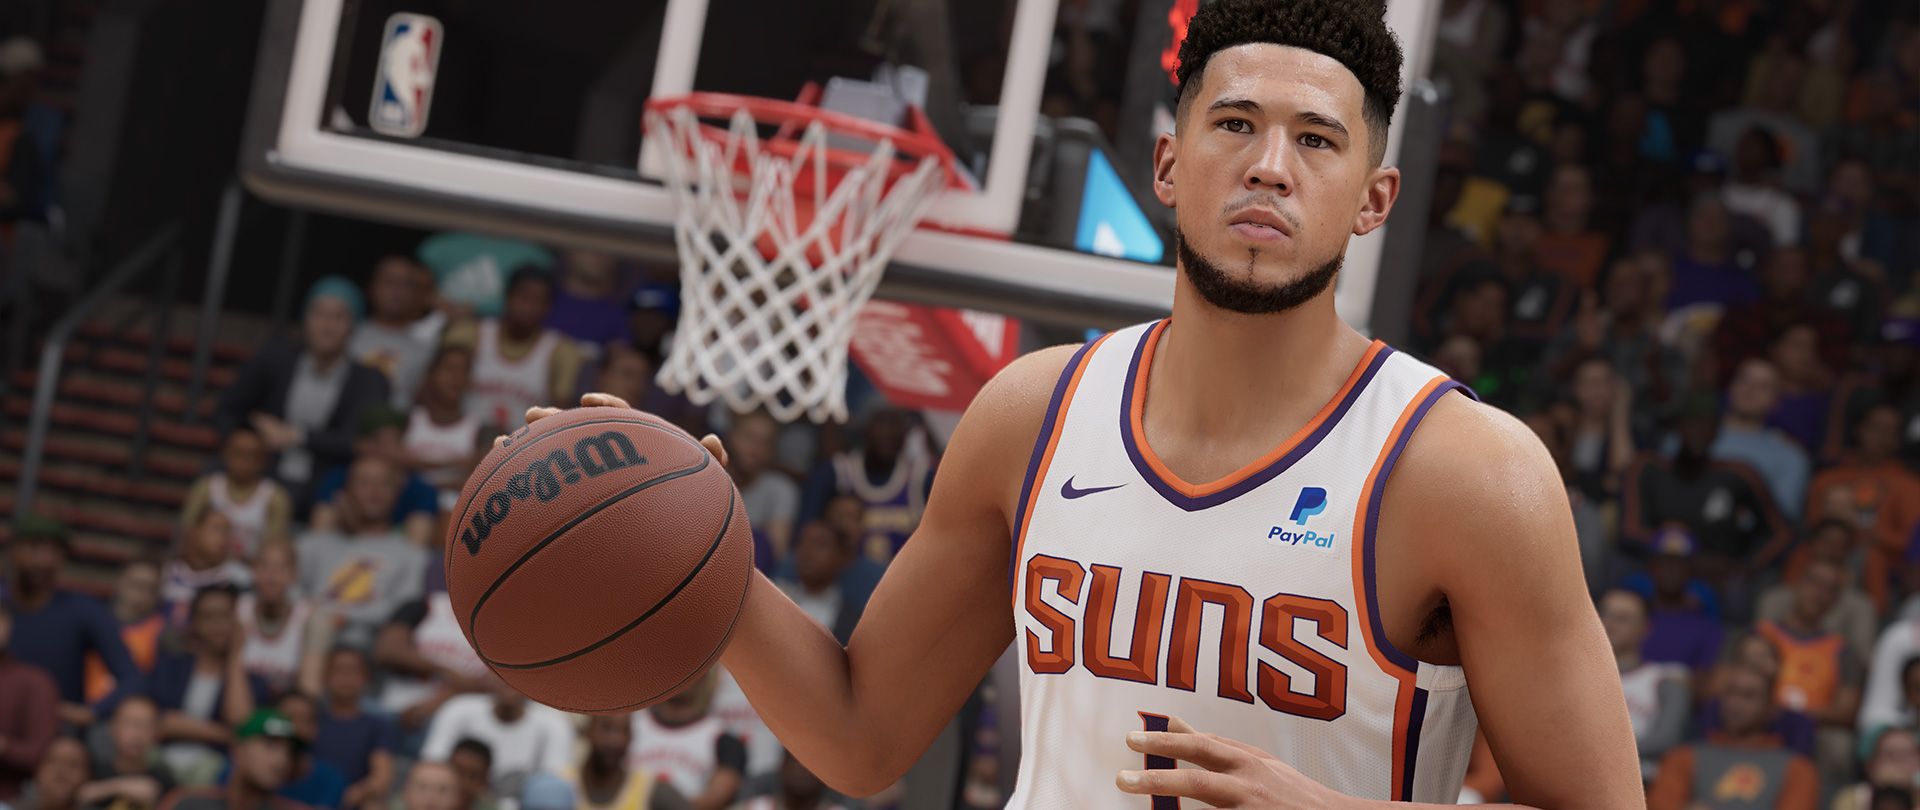 'NBA 2K23' Player Ratings Drop, Players & Twitter Reacts